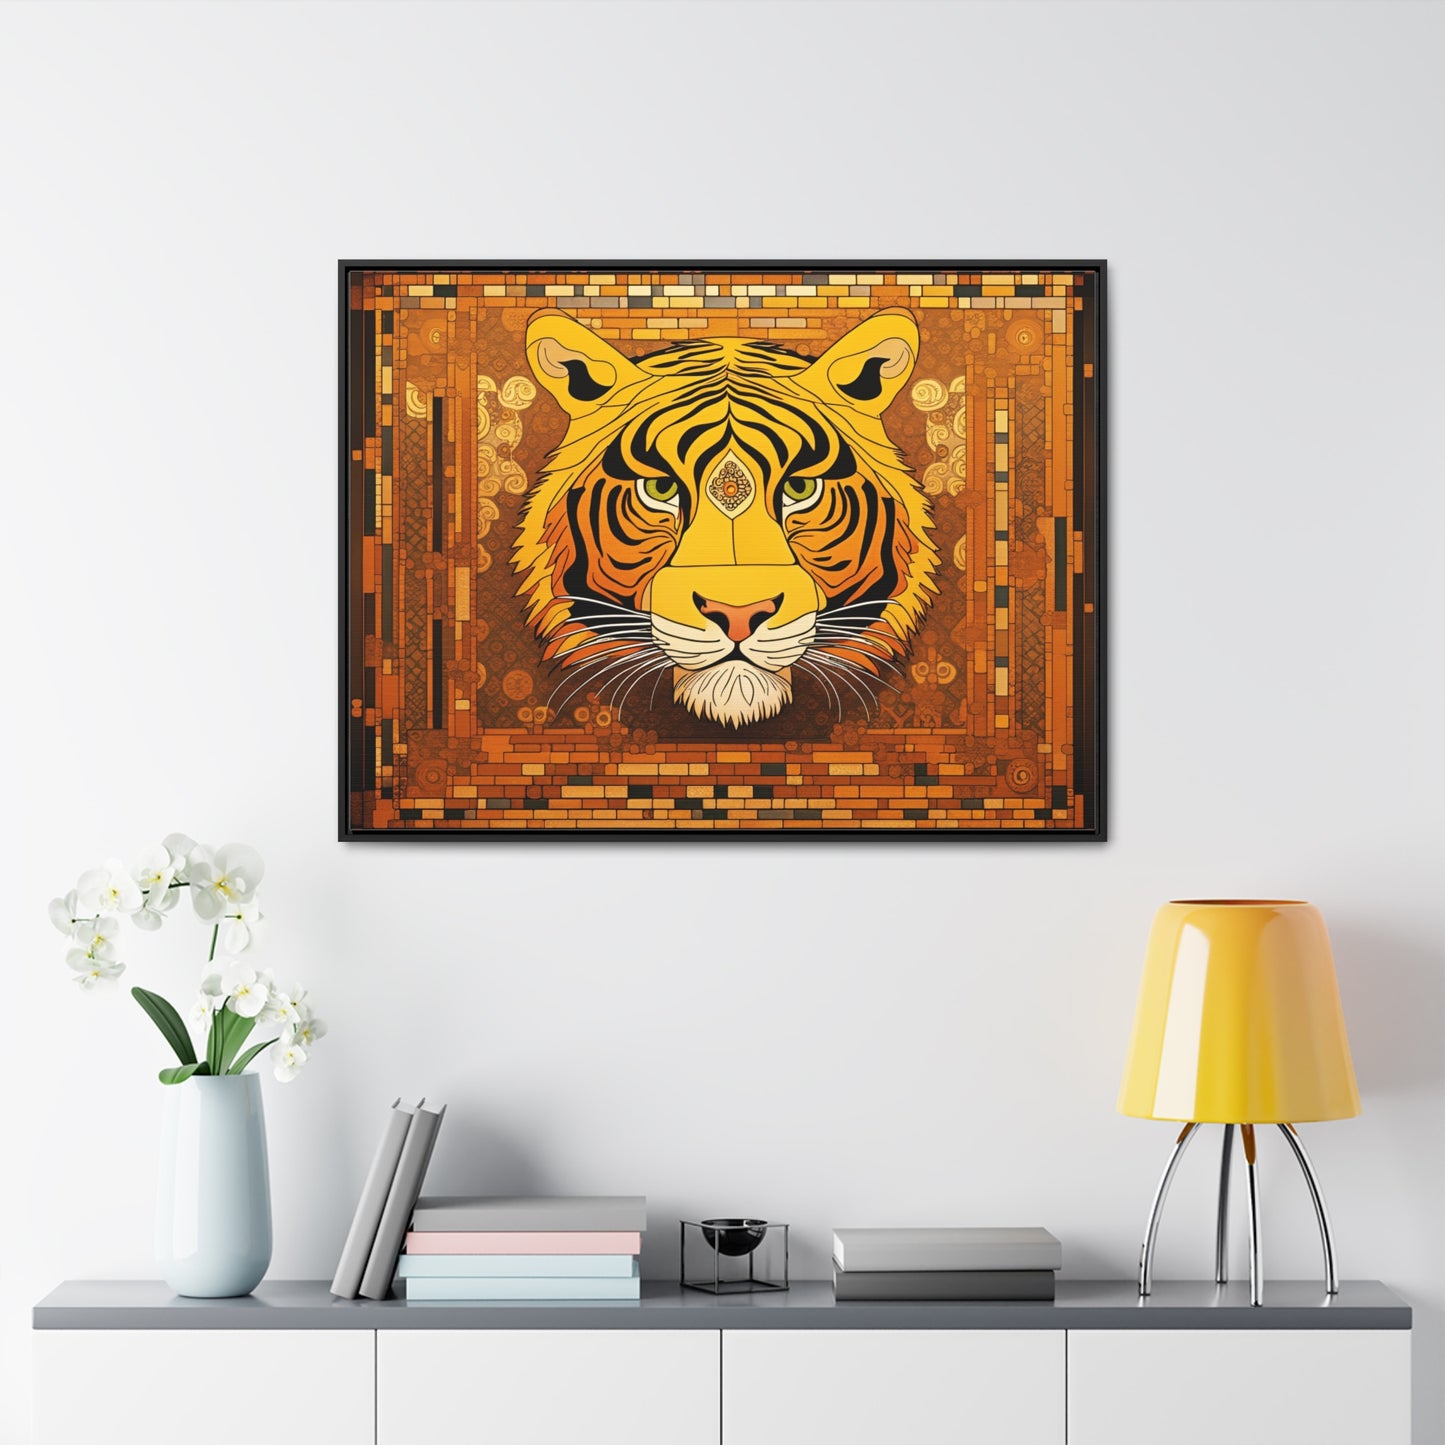 Tiger Head in the Style of Gustav Klimt Print on Canvas in a Floating Frame 40x30 hung